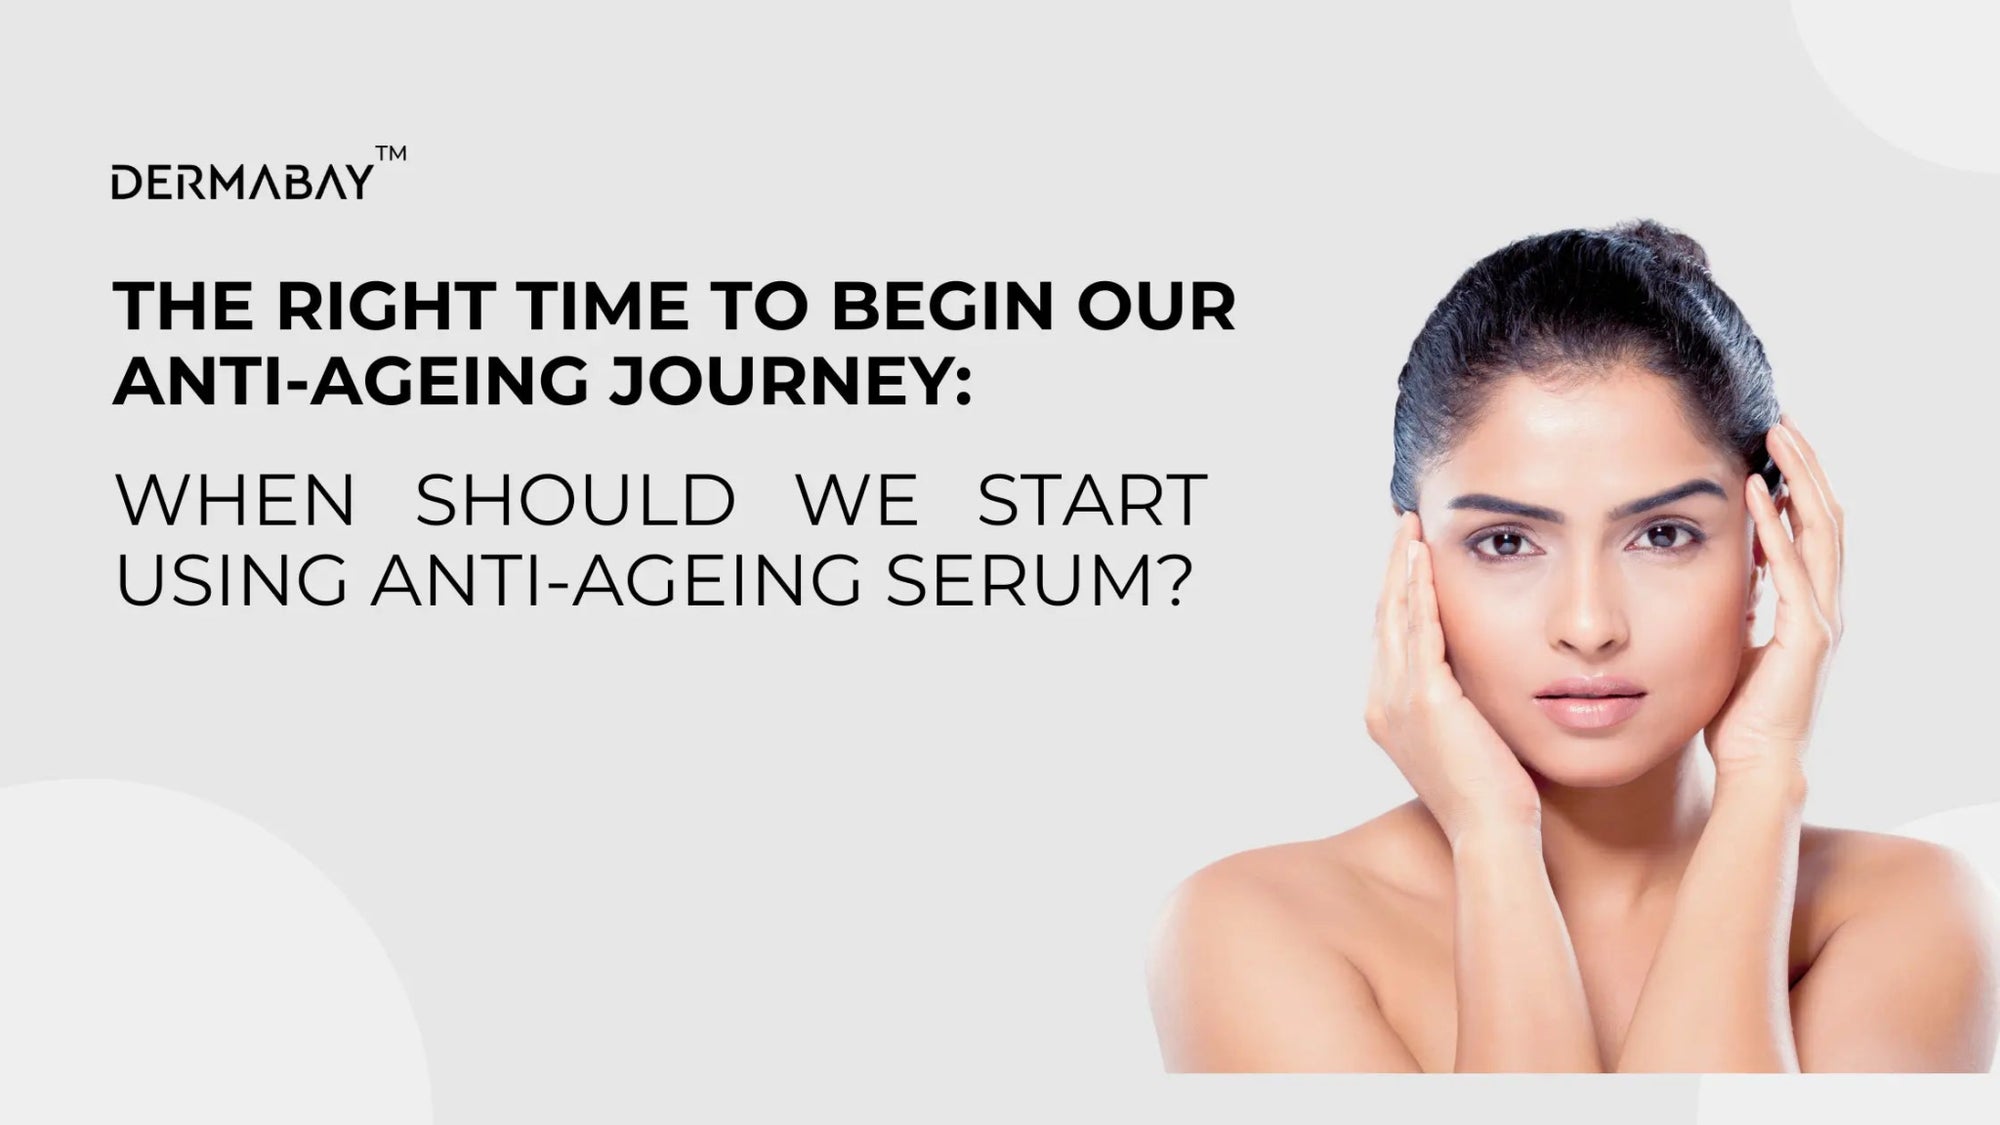 The Right Time to Begin Our Anti-Ageing Journey: When Should We Start Using Anti-Ageing Serum? - Dermabay